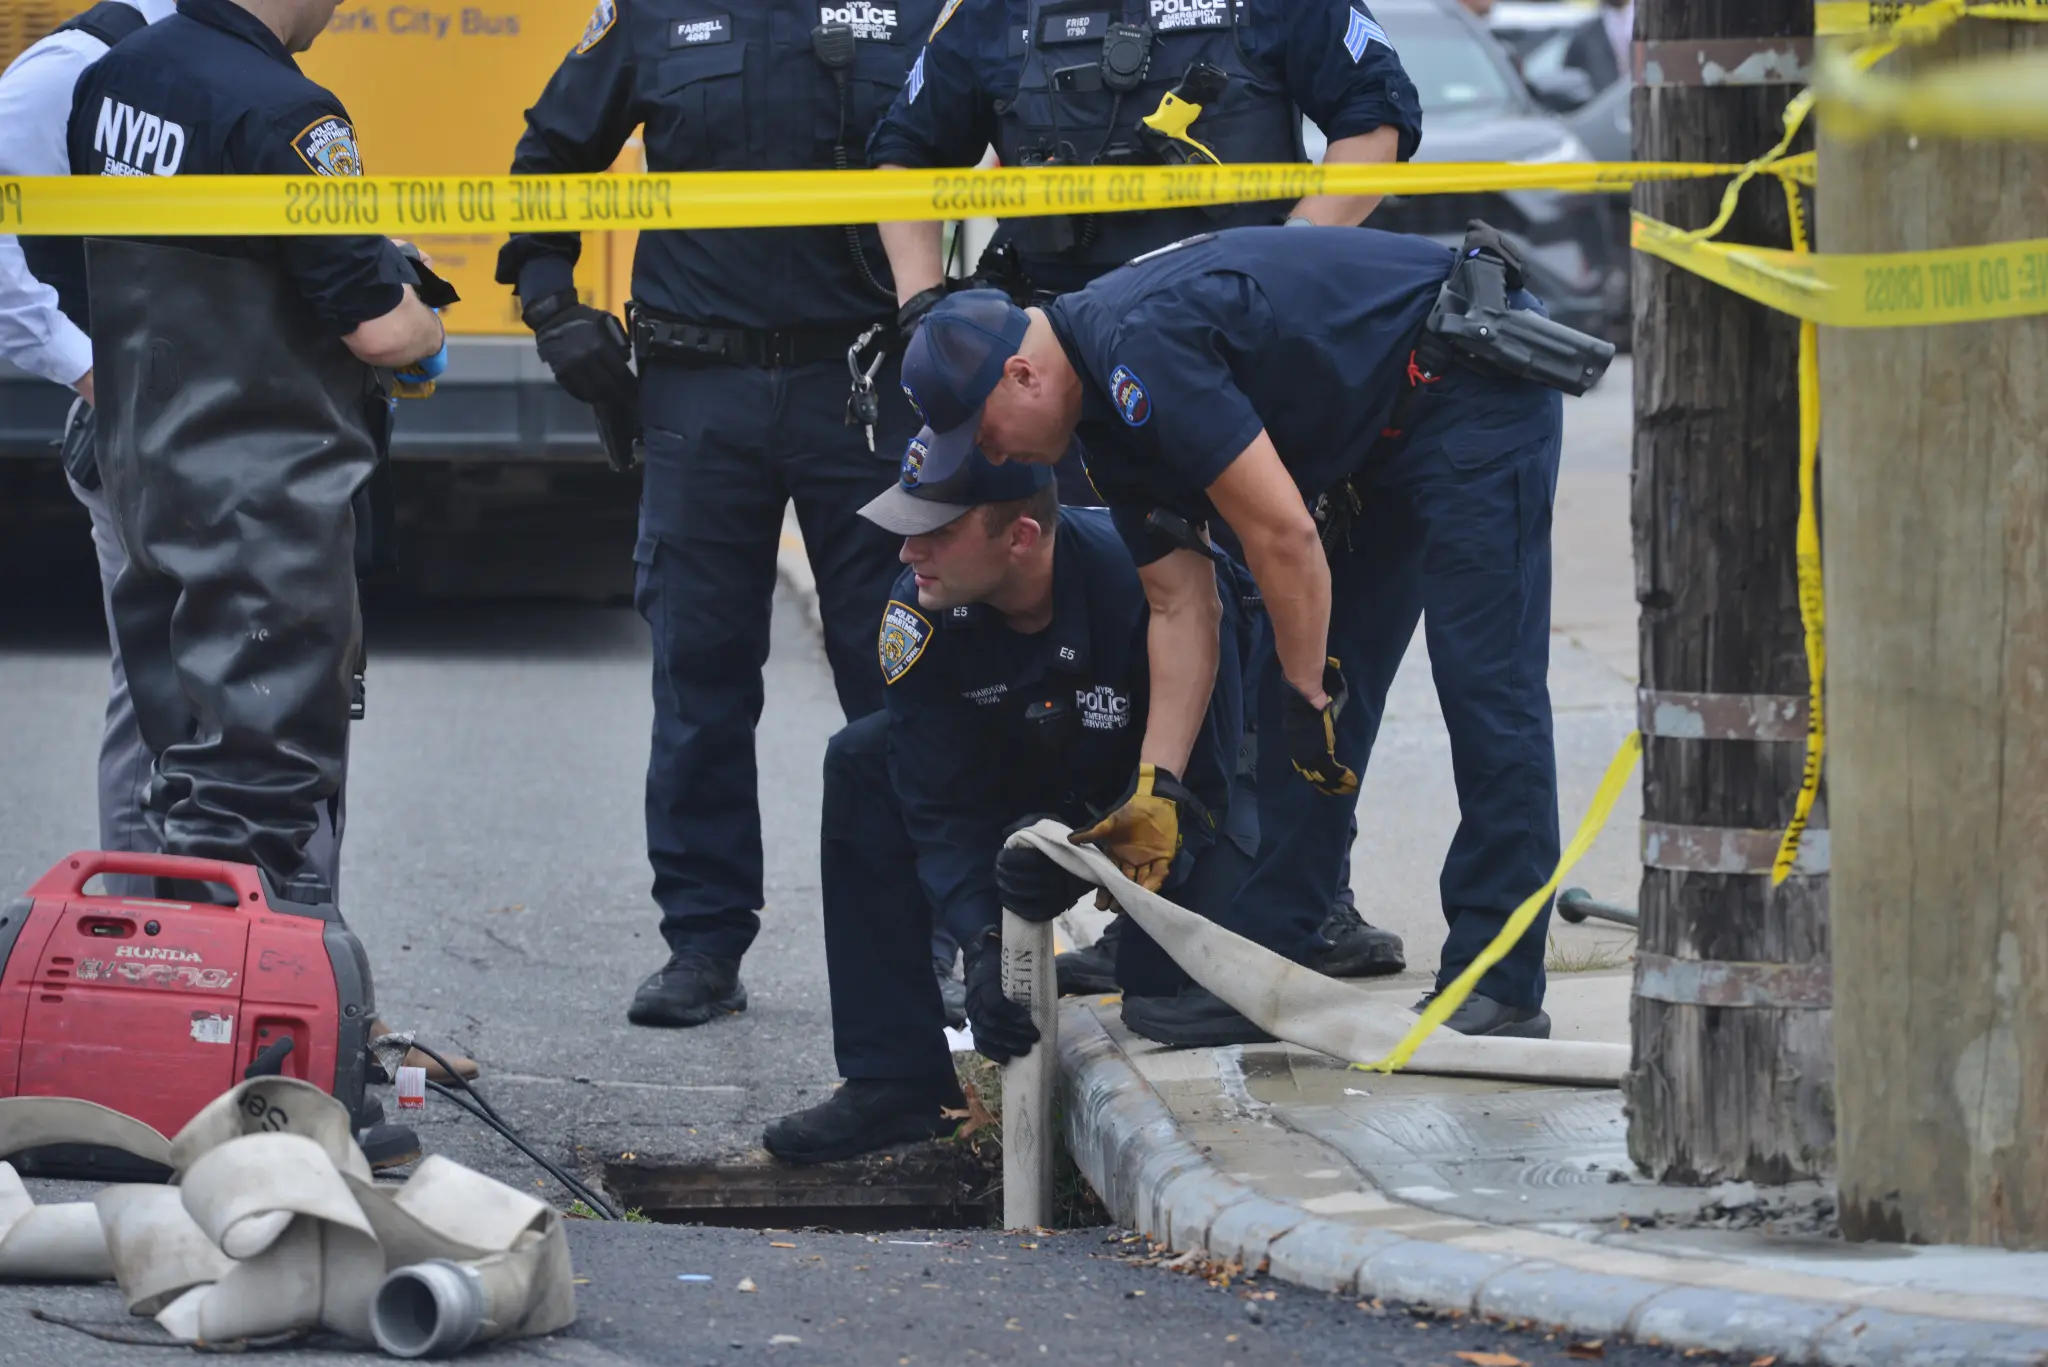 Police looking for the murder weapon in a sewer after a 13-year-old was stabbed to death on an MTA bus in Staten Island.